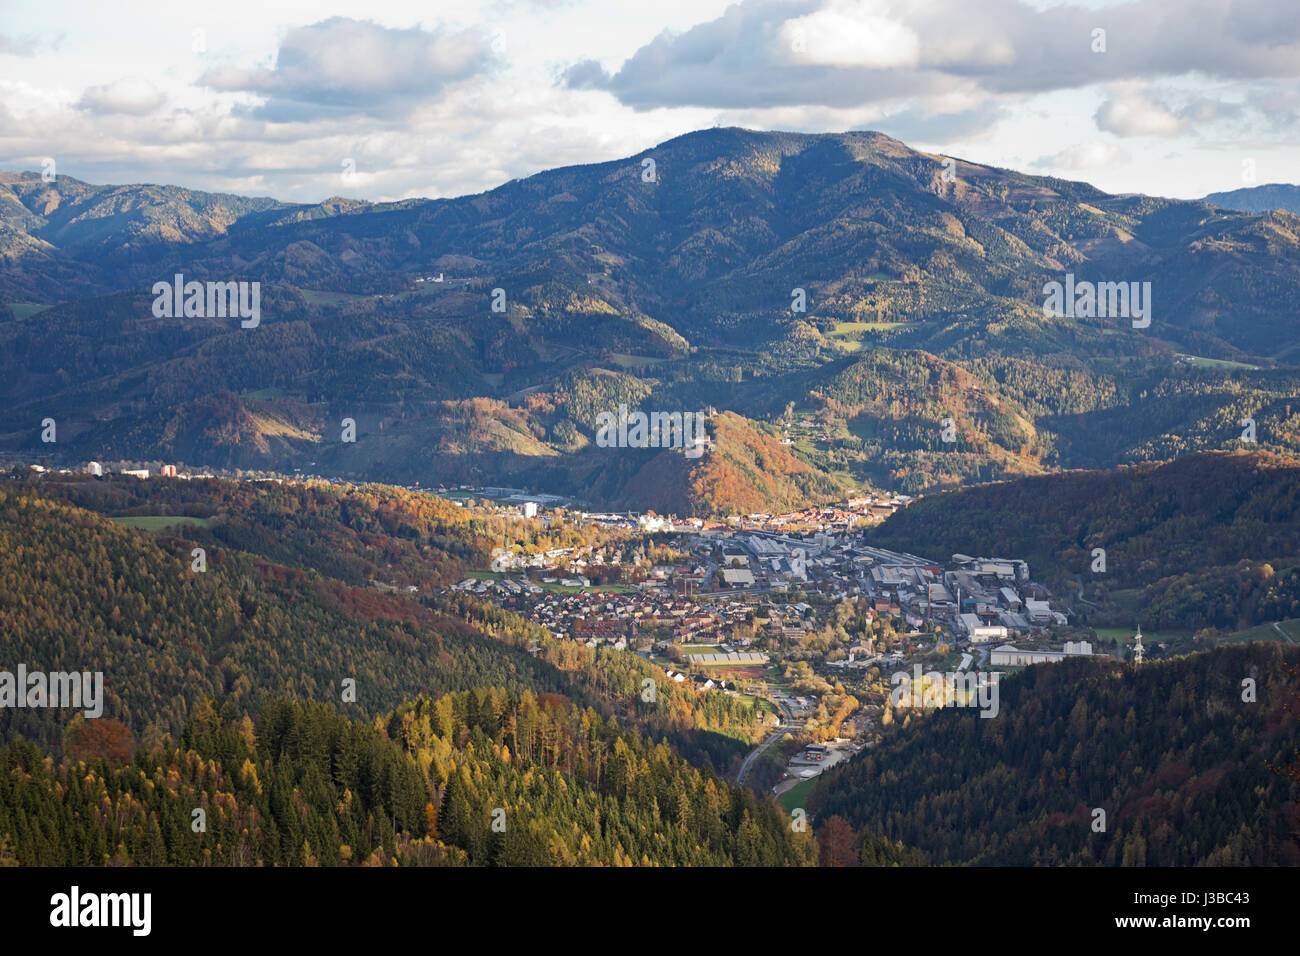 Kapfenberg, a town in the midst of the forested foothills of the Styrian limestone alps. Stock Photo